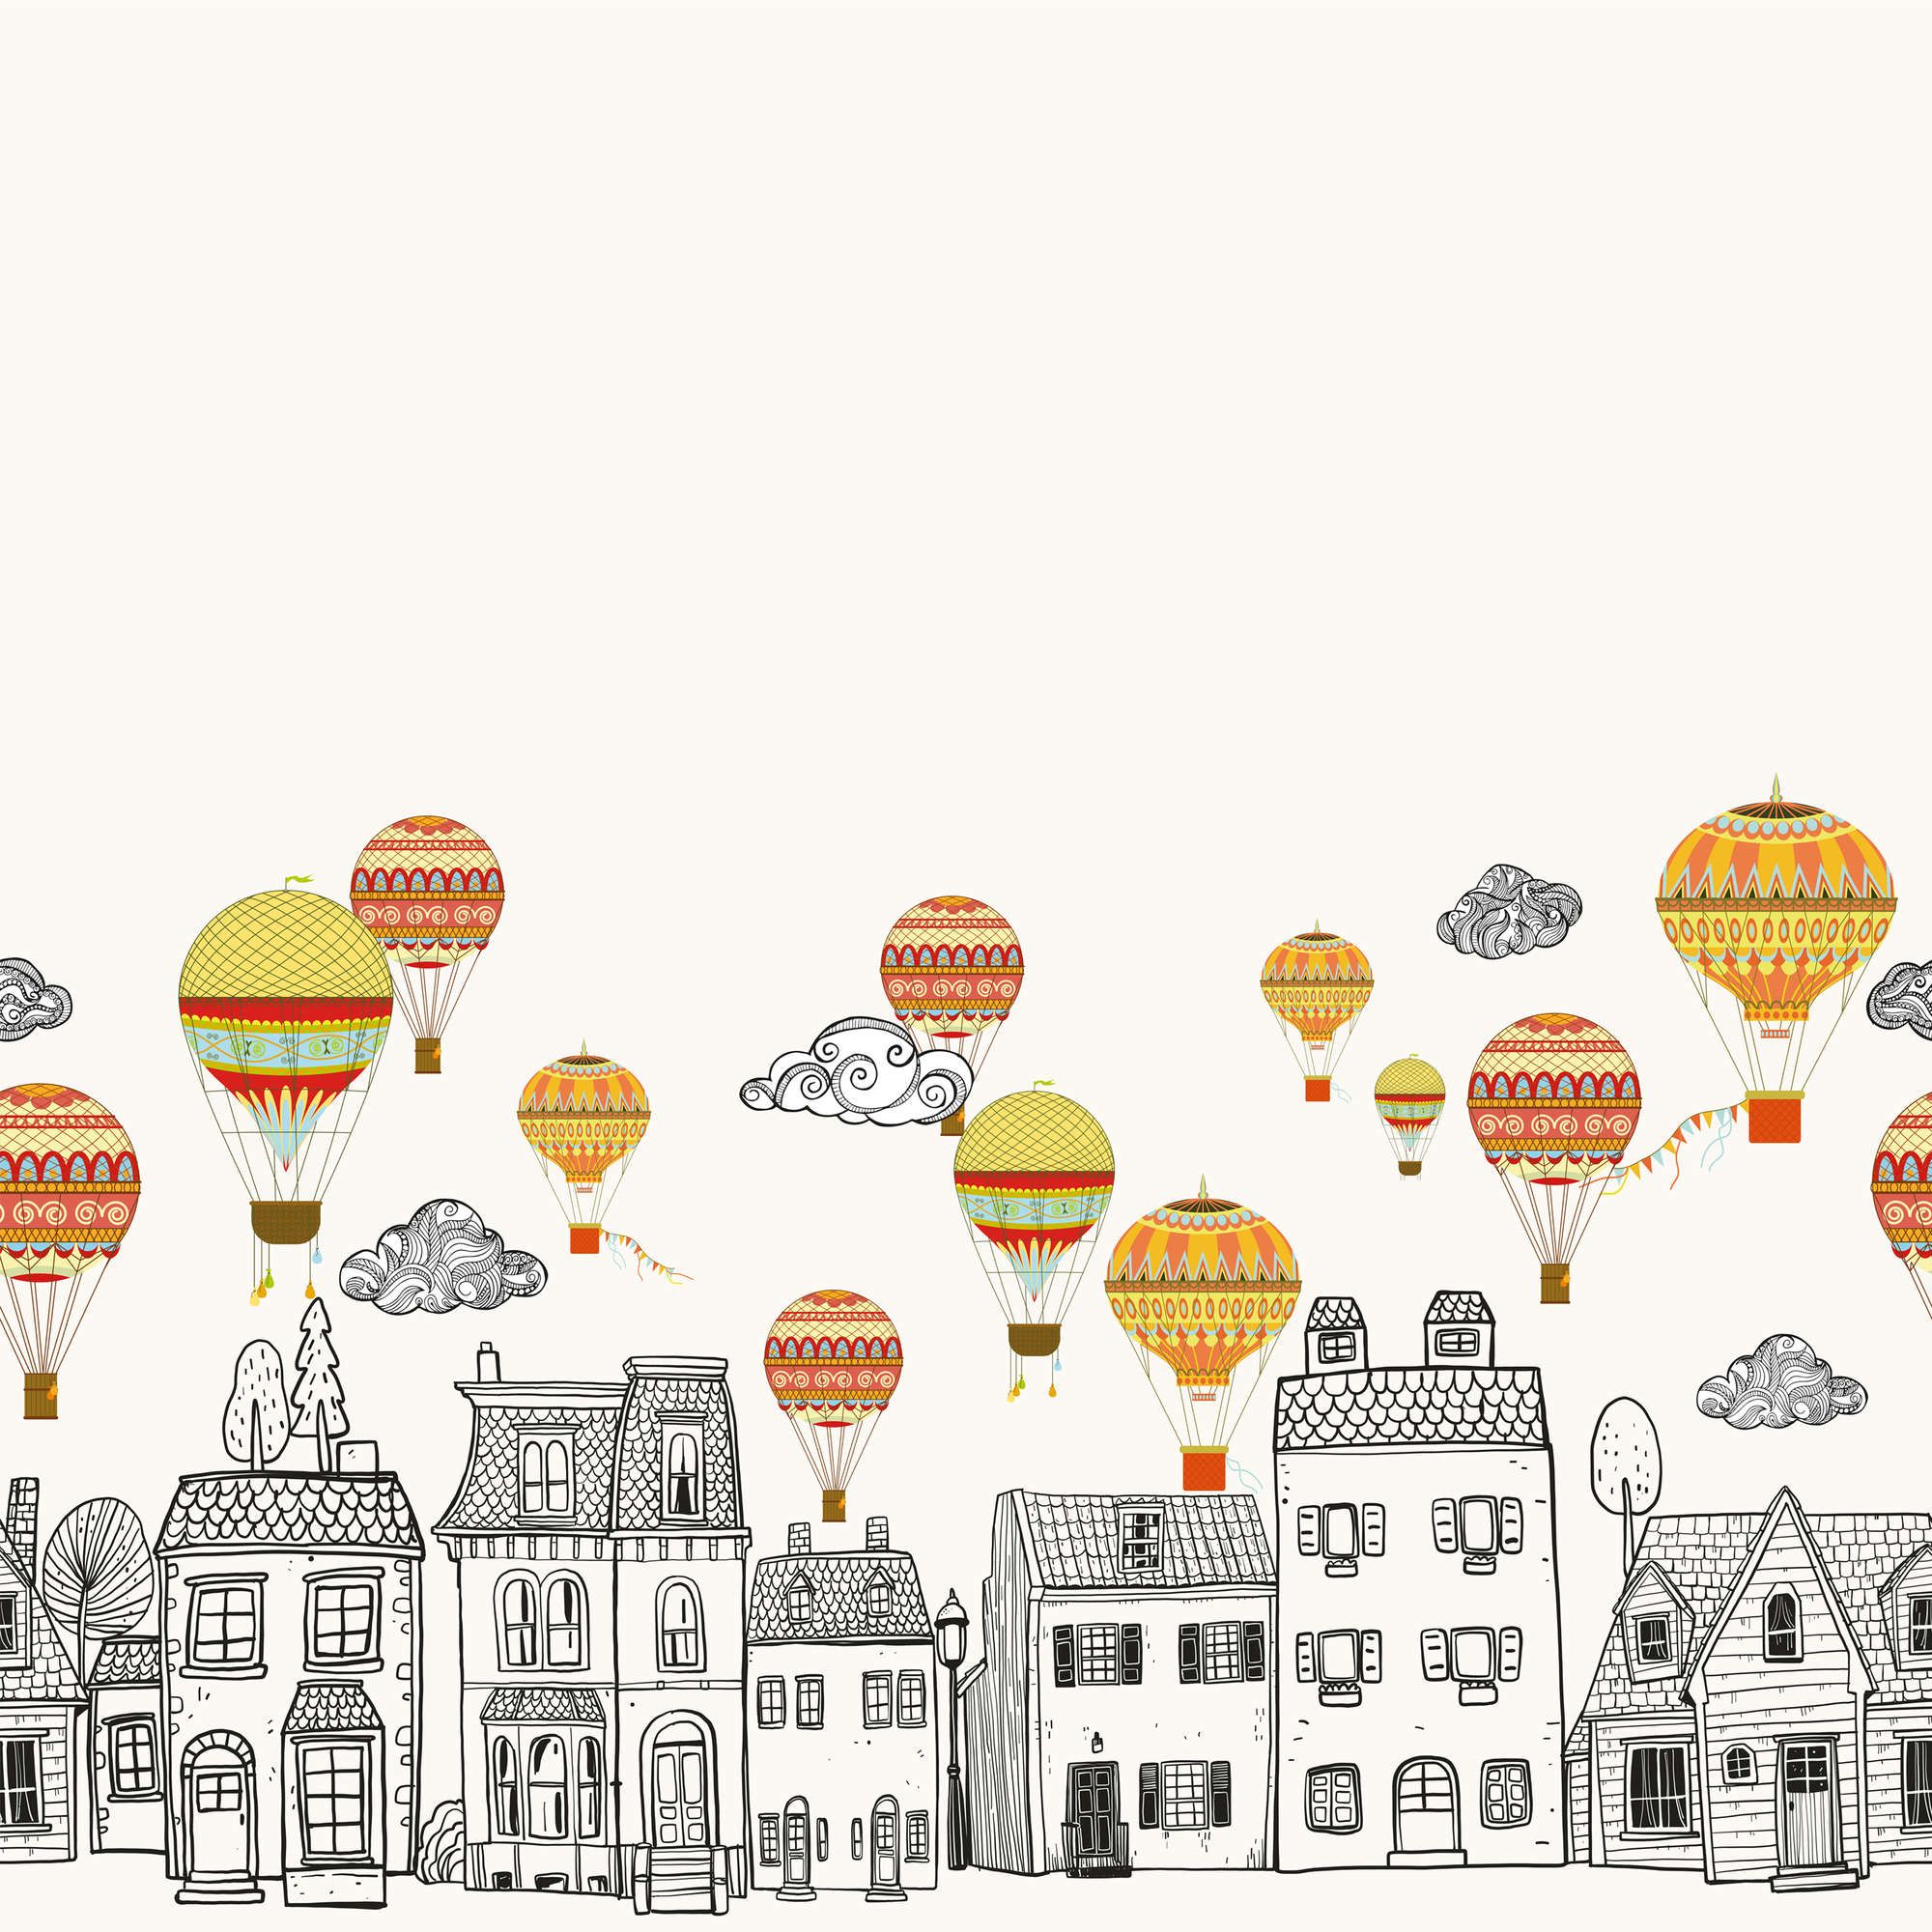             Small Town with Hot Air Balloons Wallpaper - Smooth & Matte Non-woven
        